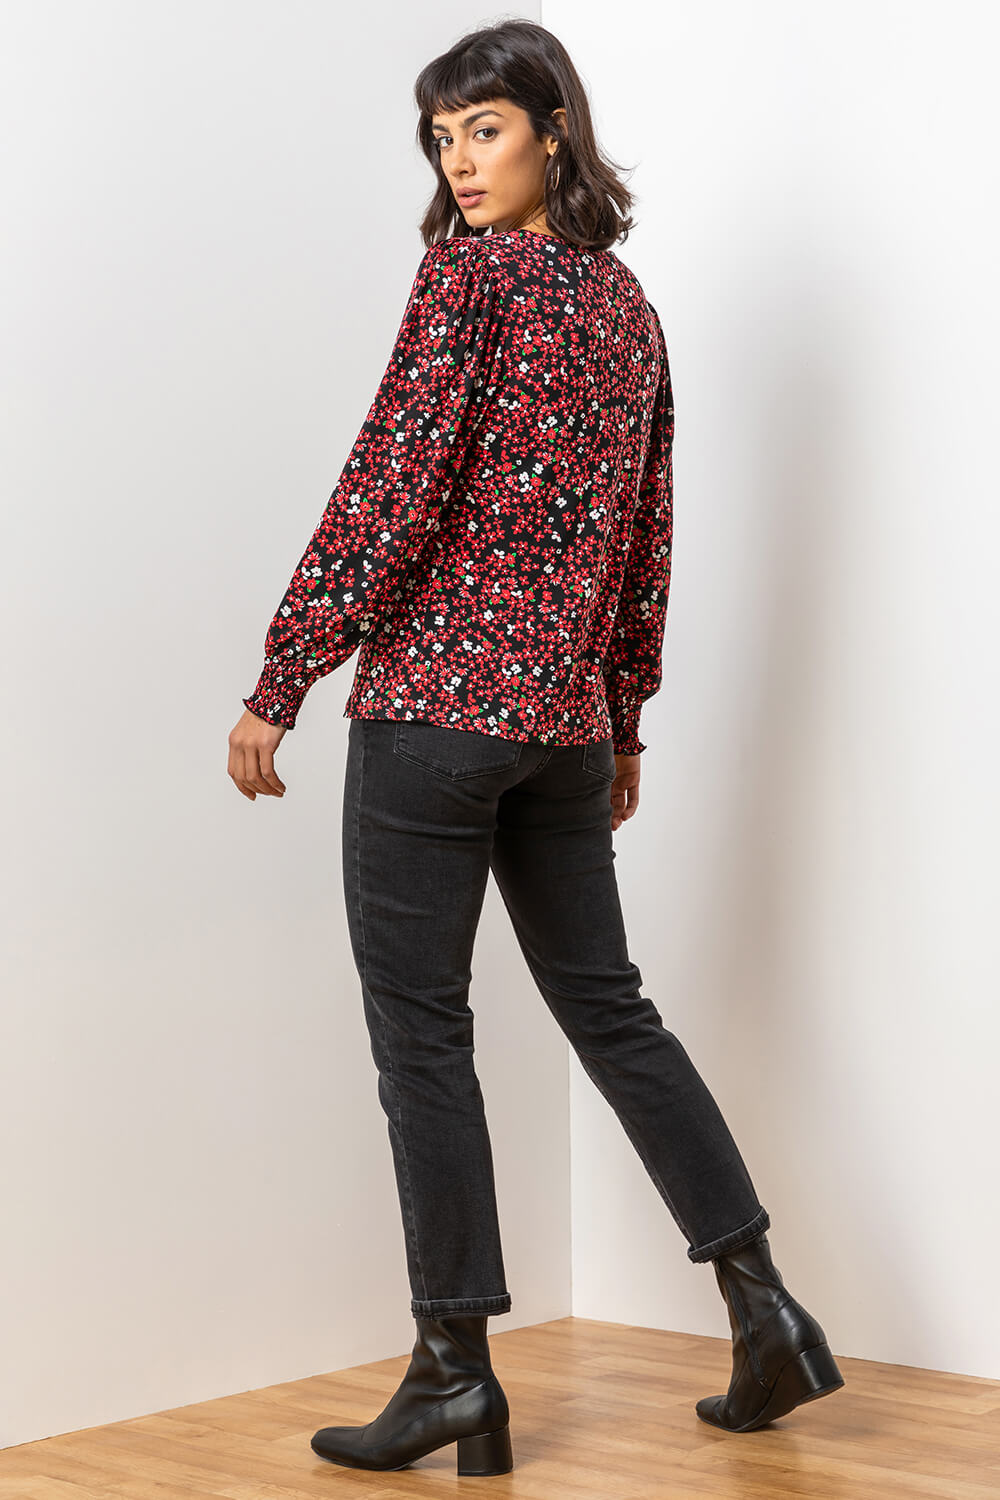 Red Ditsy Floral Print Top, Image 3 of 5